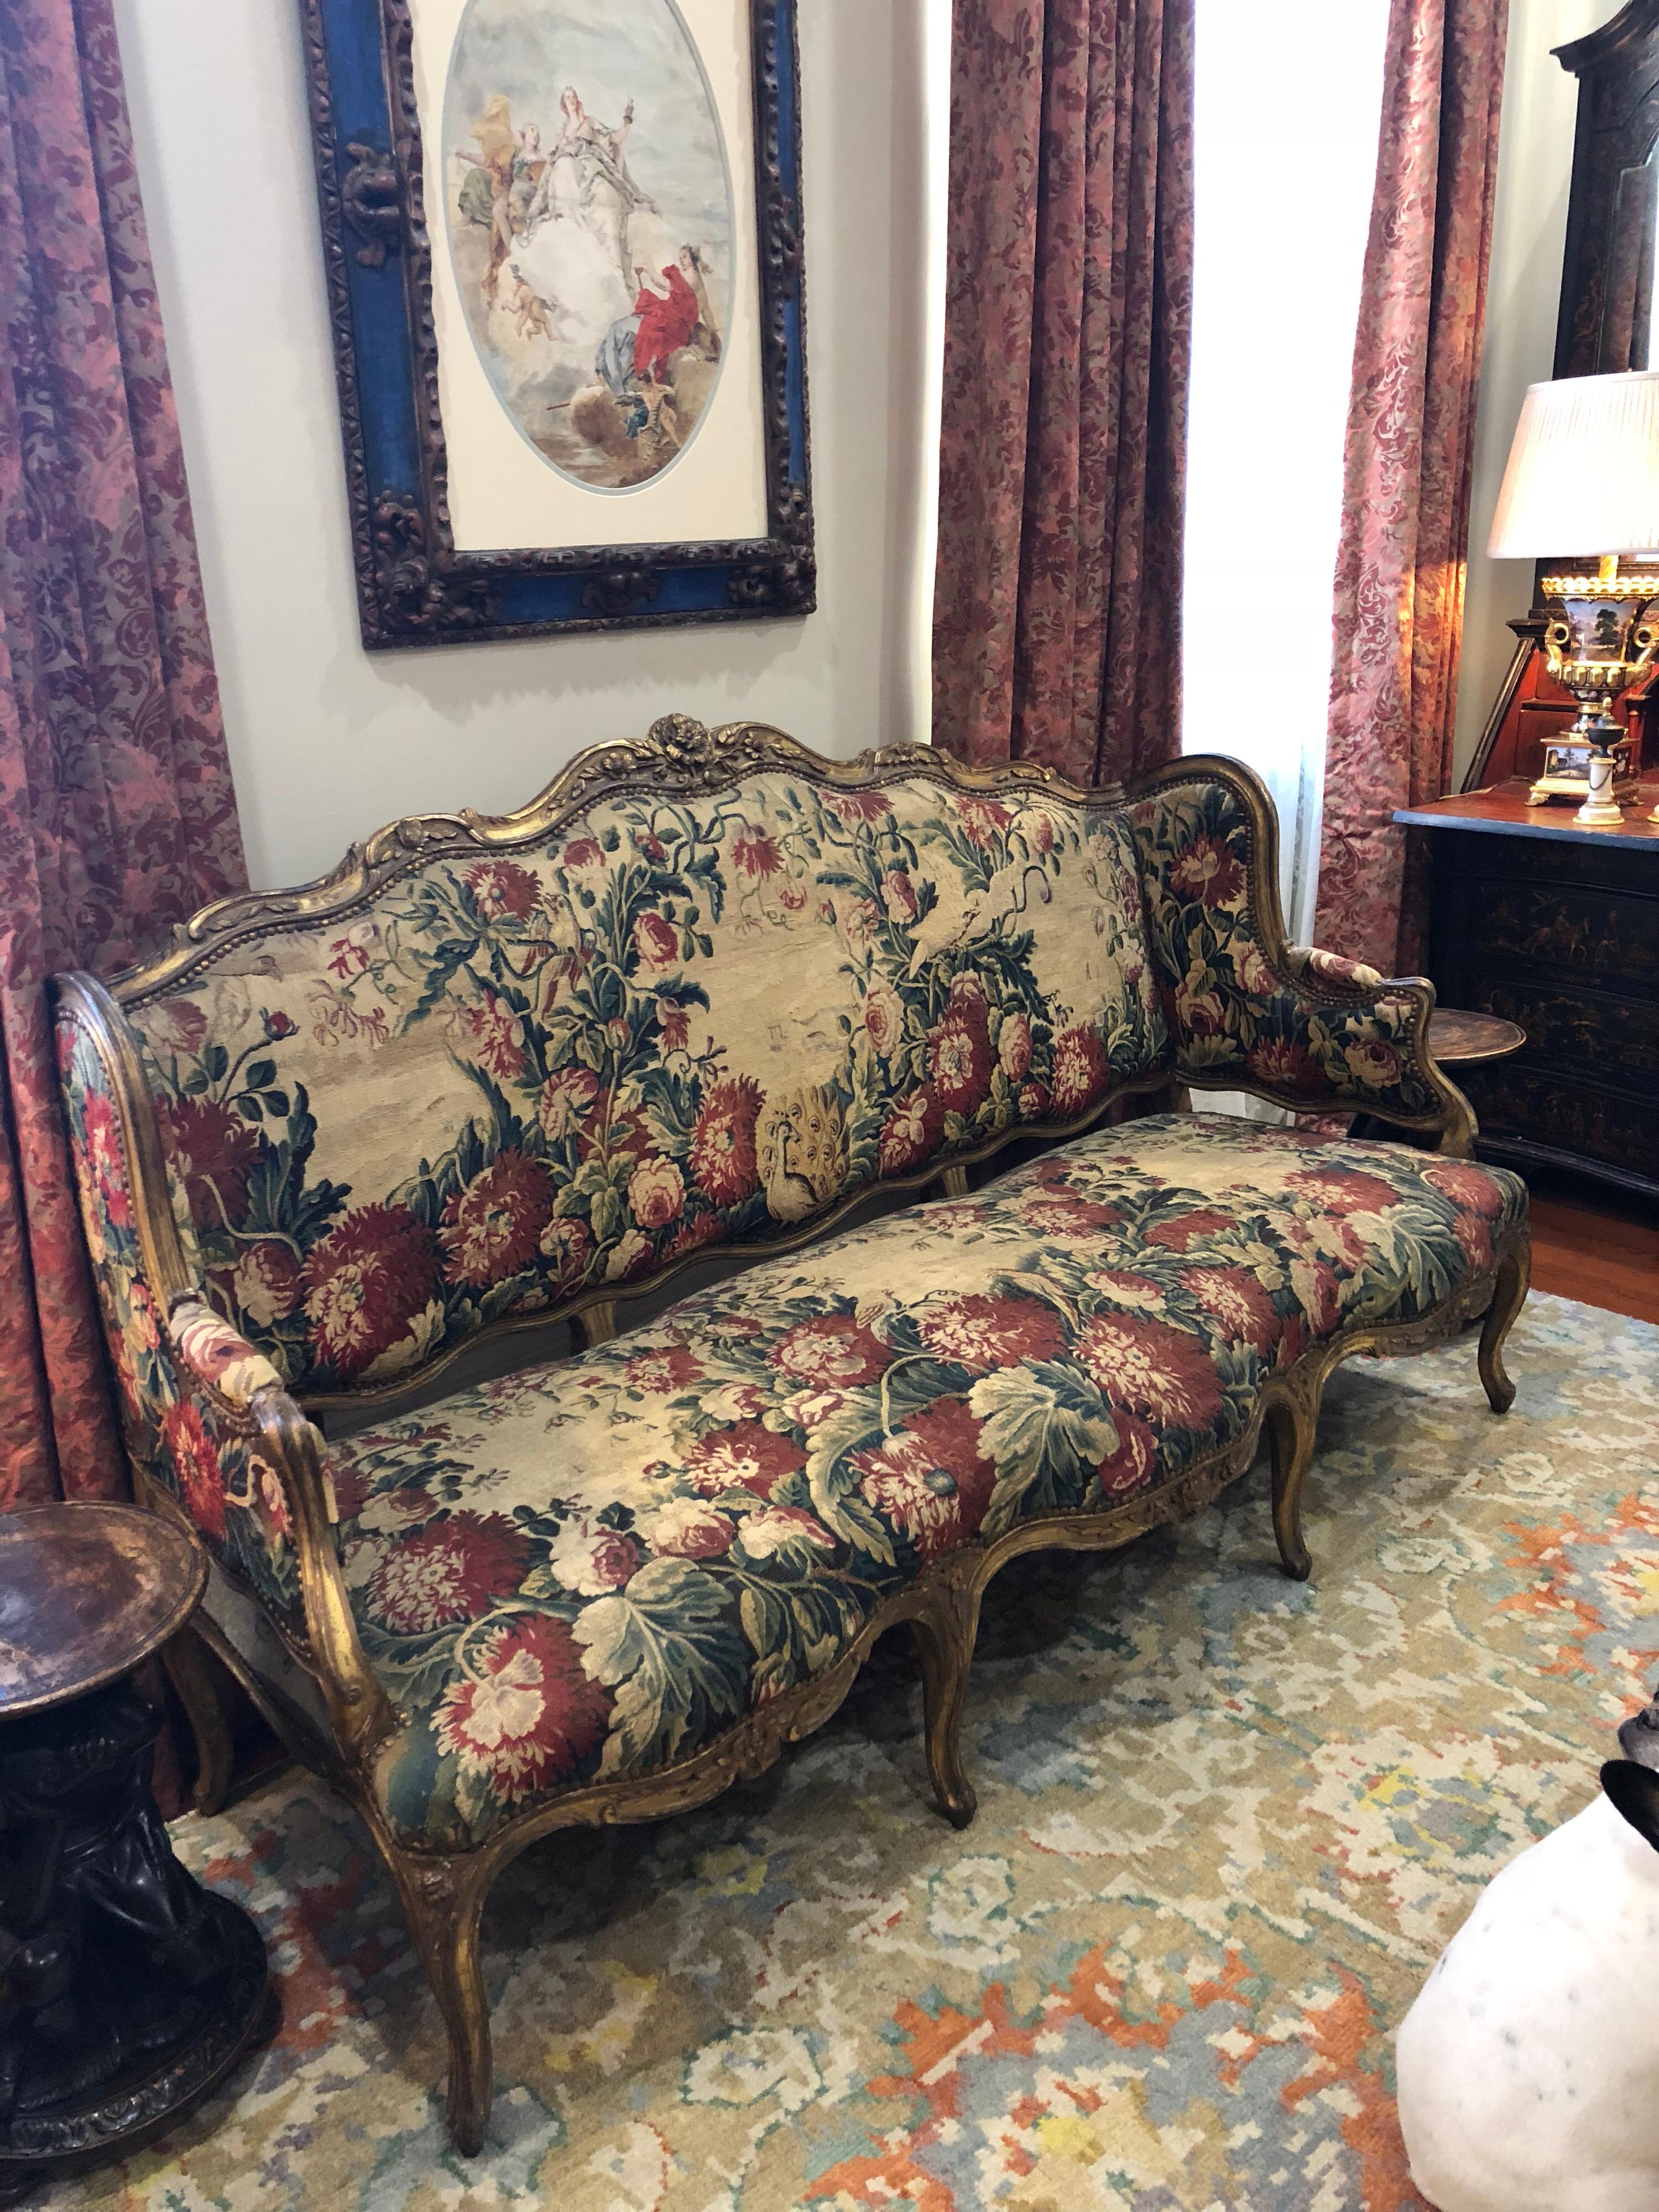 18th century French Aubusson covered sofa with giltwood frame. The frame is pegged appropriately and the Aubusson is in excellent shape. No major tears or rips. This was deaccessioned from a small museum in the mid west.
 